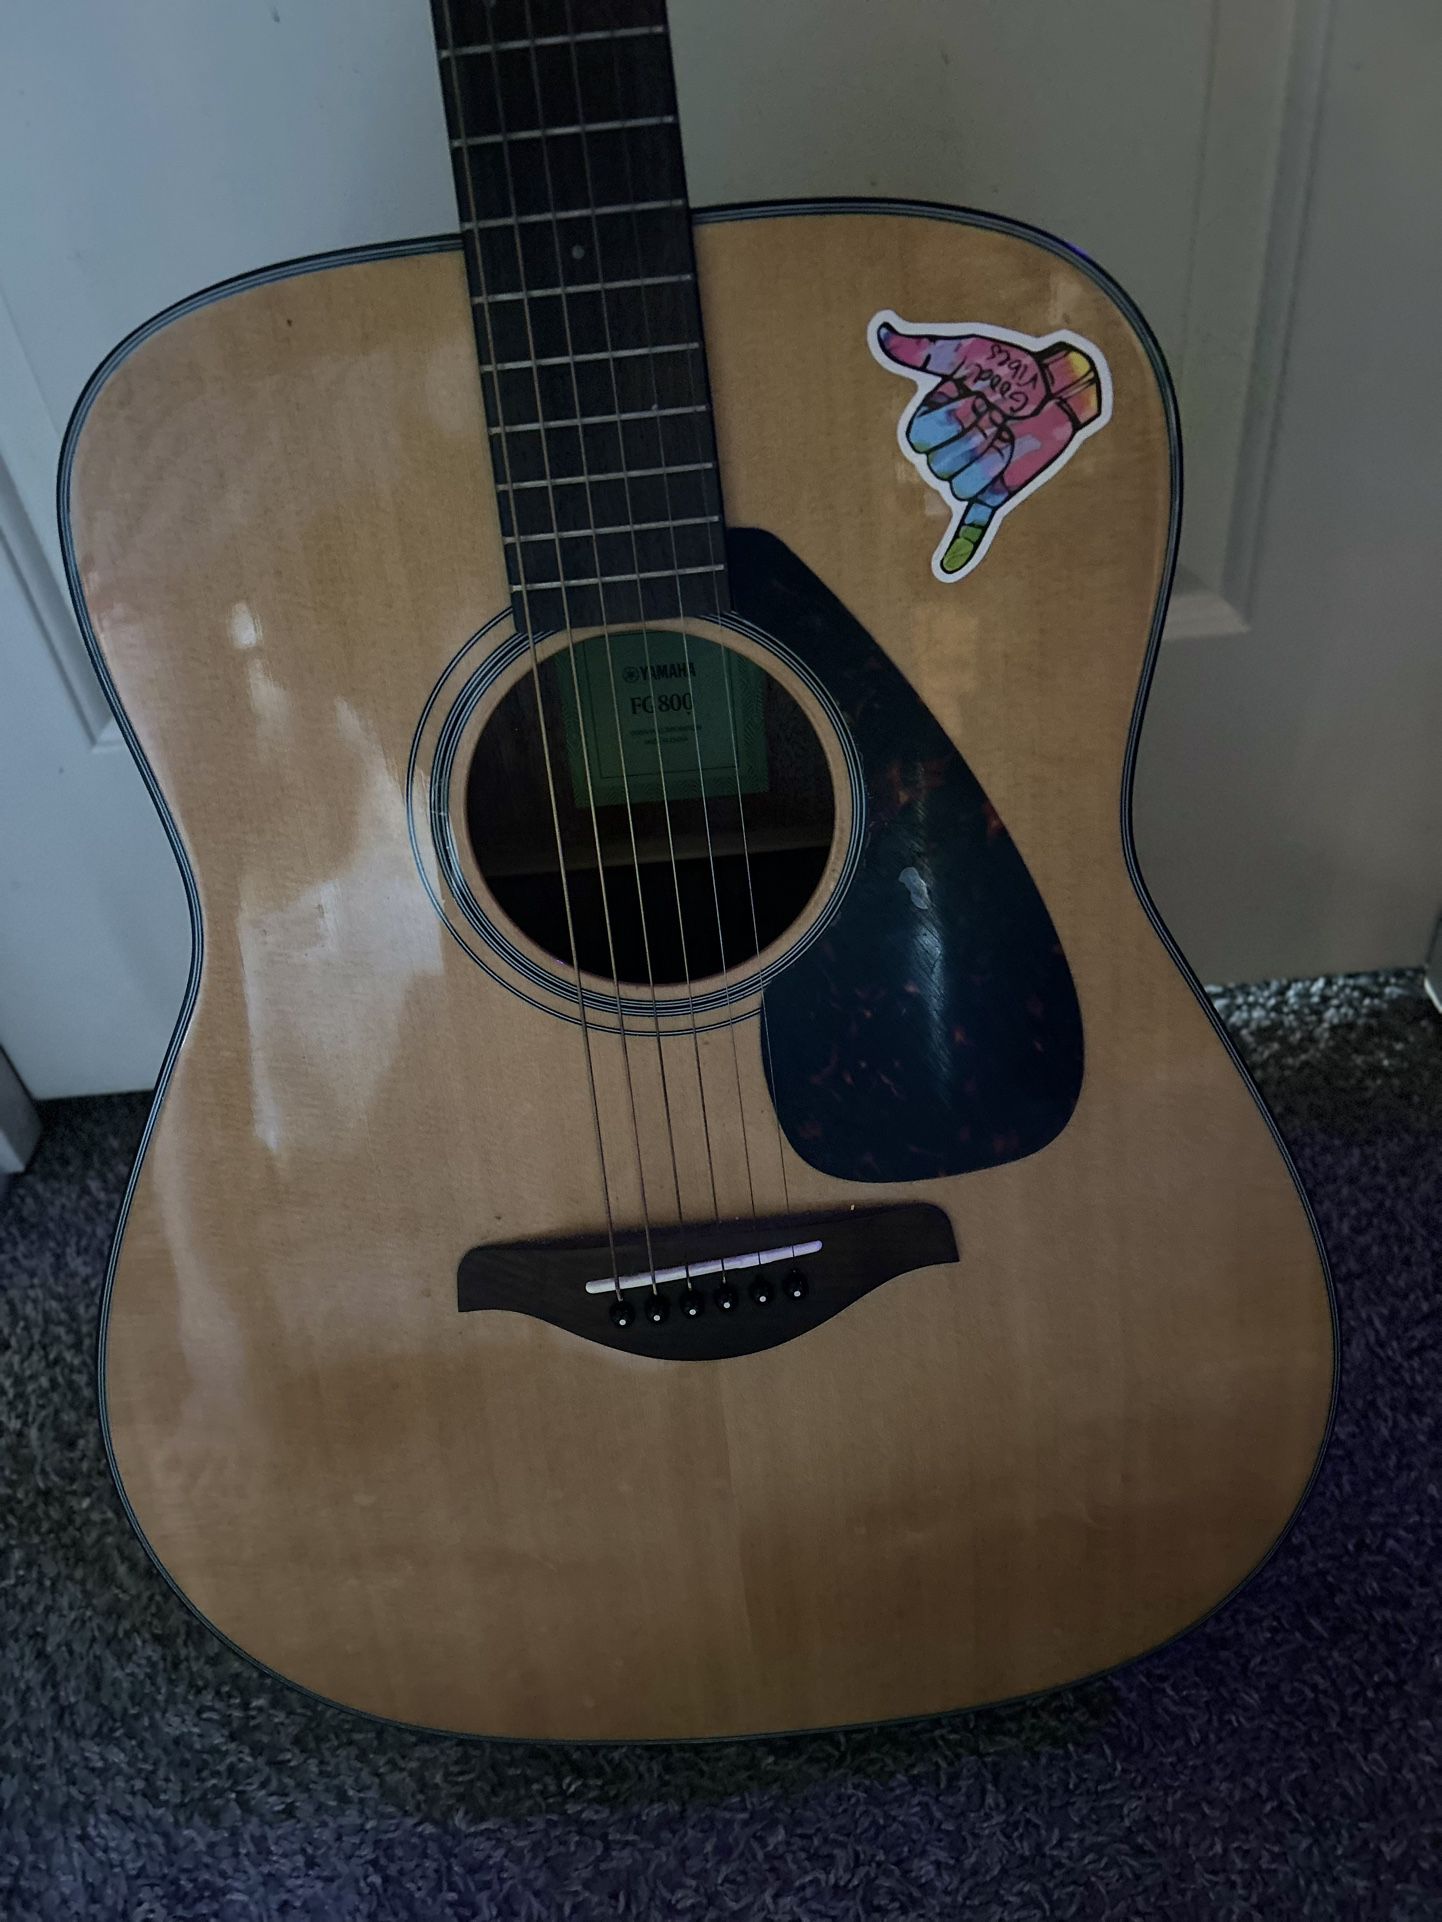 YAMAHA Acoustic Guitar With Case